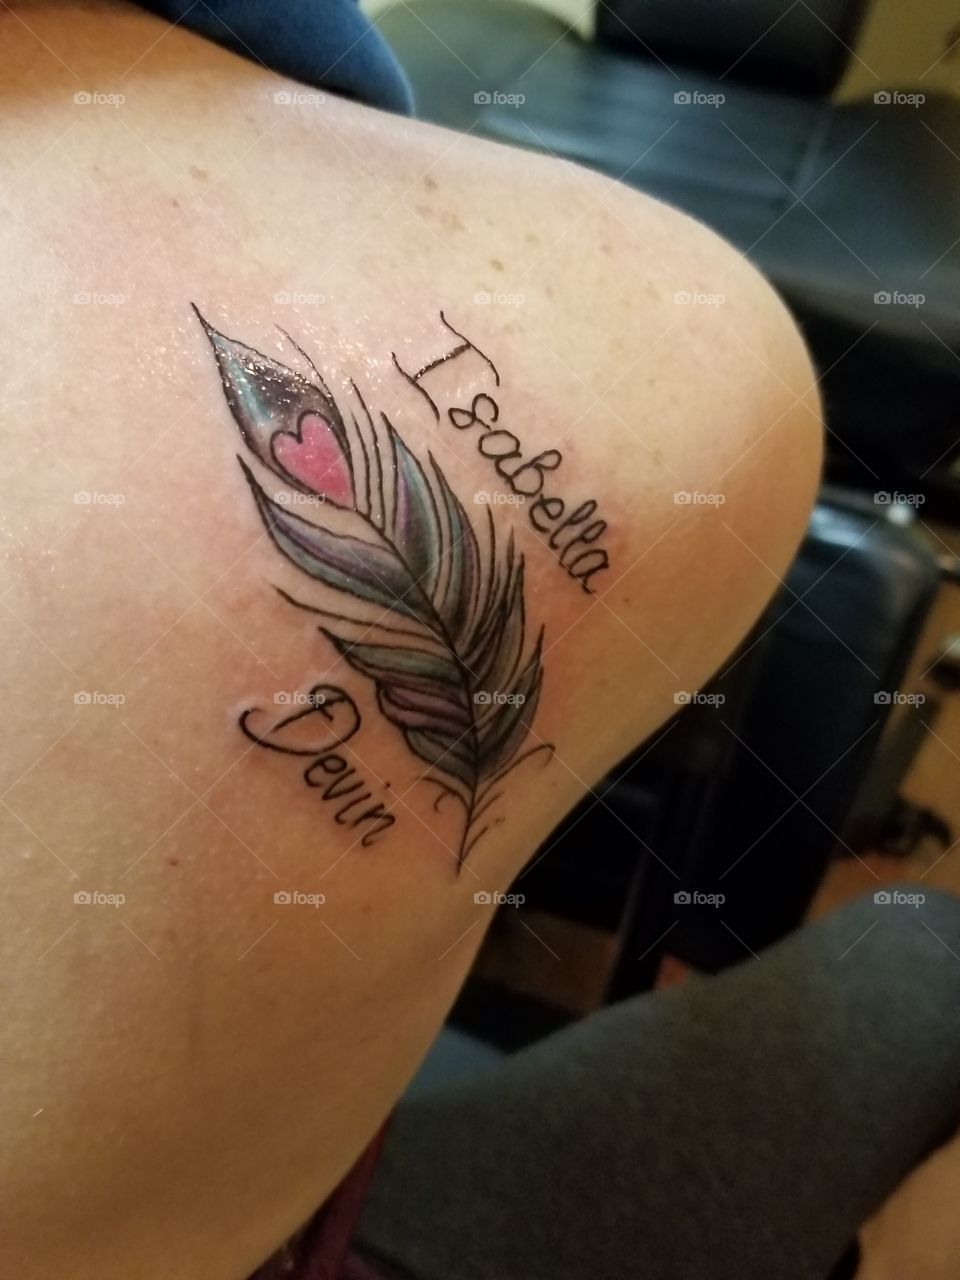 Daughter Tattoo of her child birthstone and name